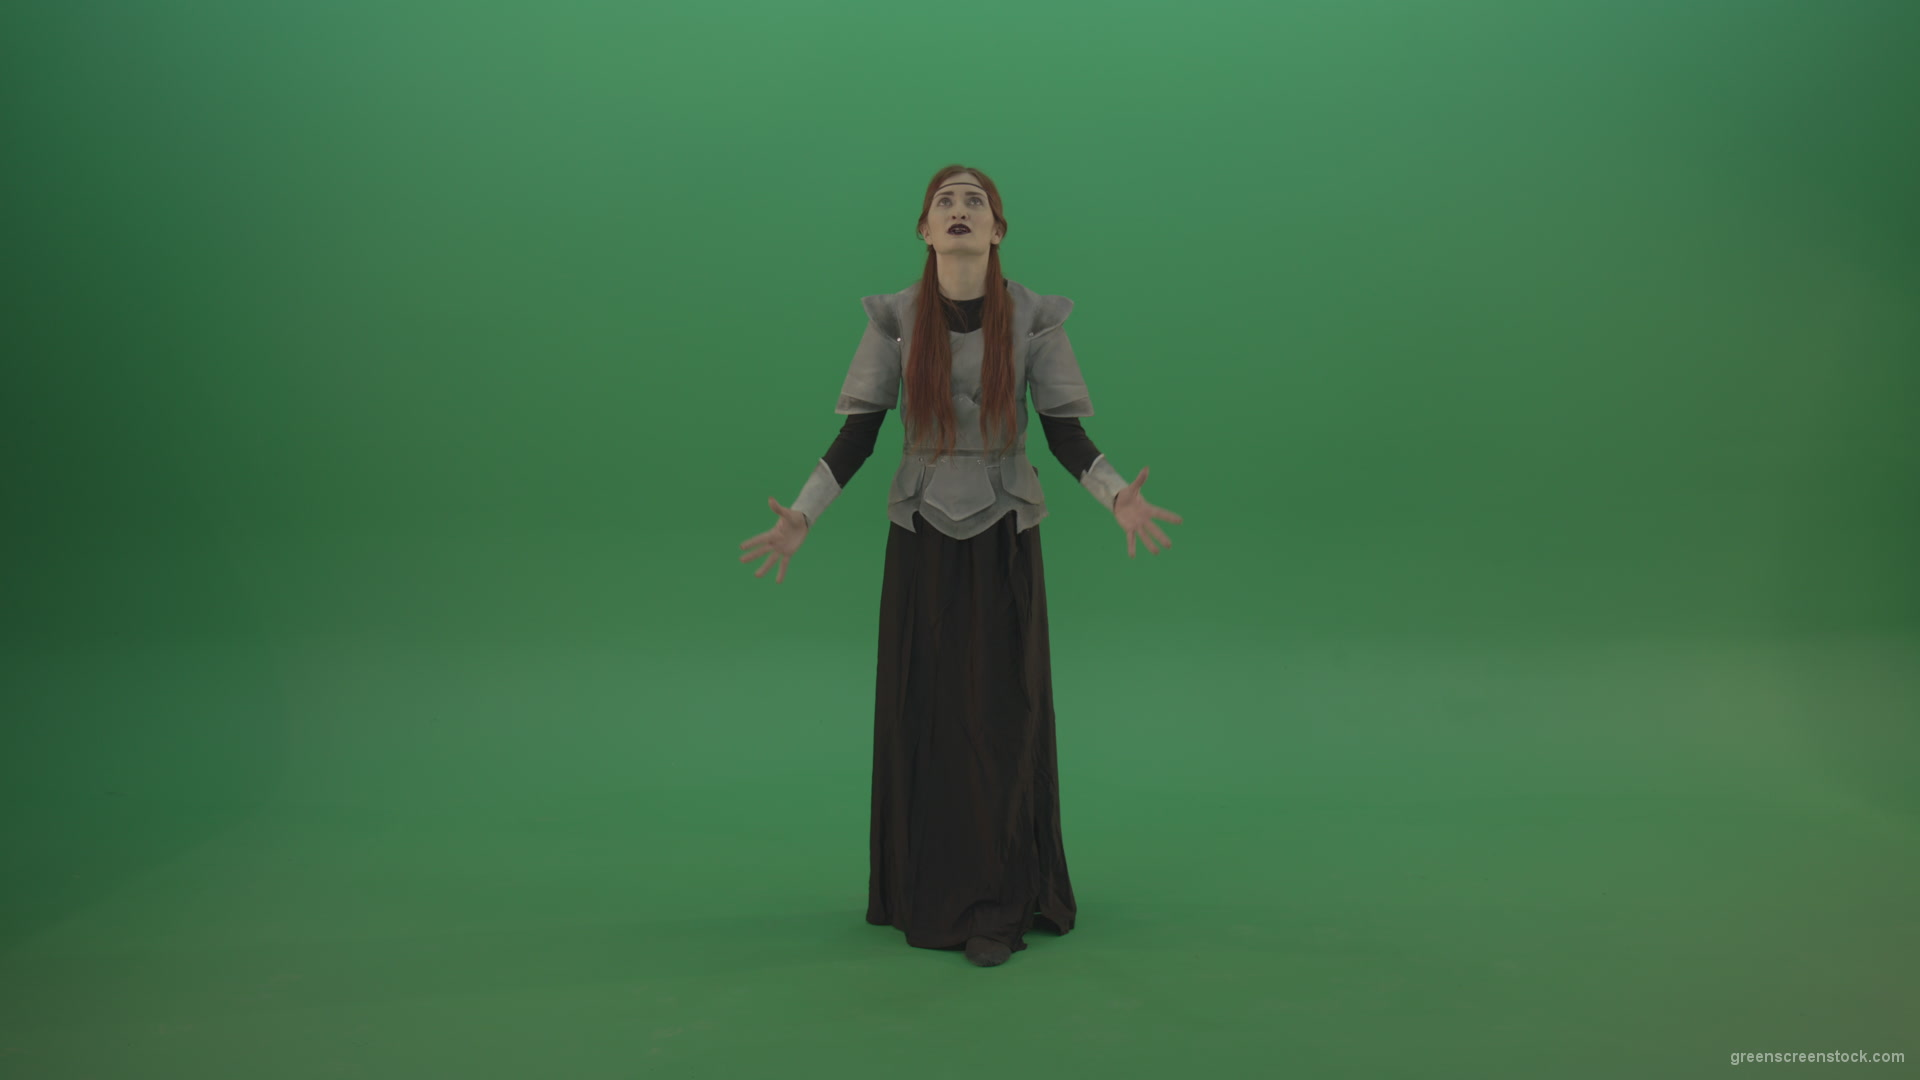 Redheaded-girl-in-full-height-in-medieval-warrior-clothing-asks-for-help-from-the-gods-on-green-screen_004 Green Screen Stock